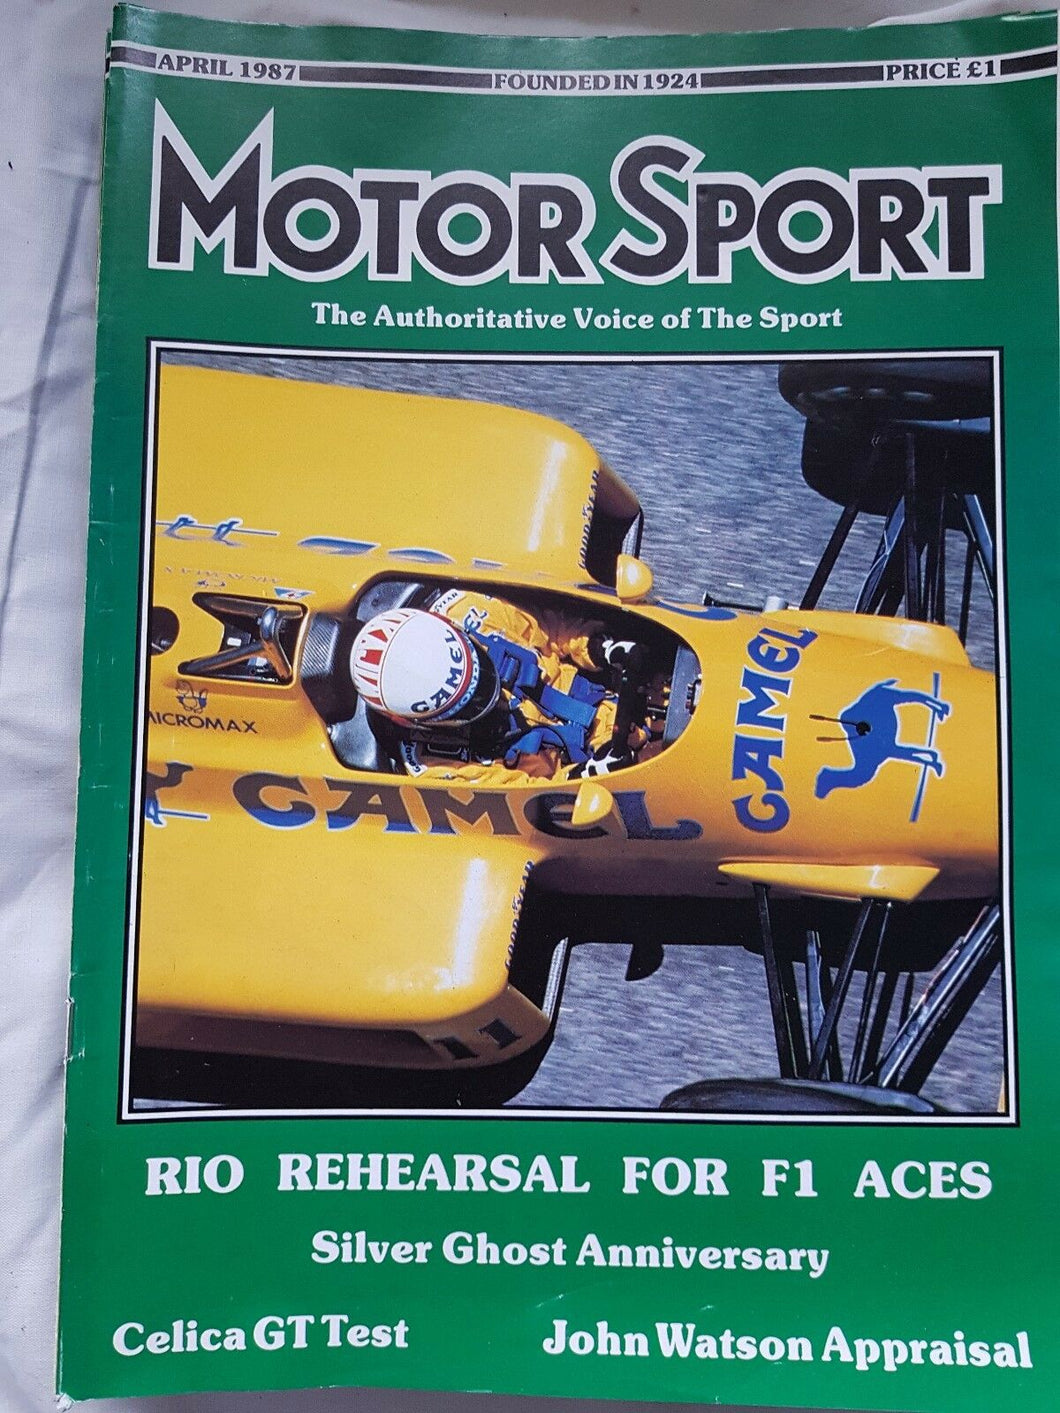 Motorsport April 1987 please see second image for contents